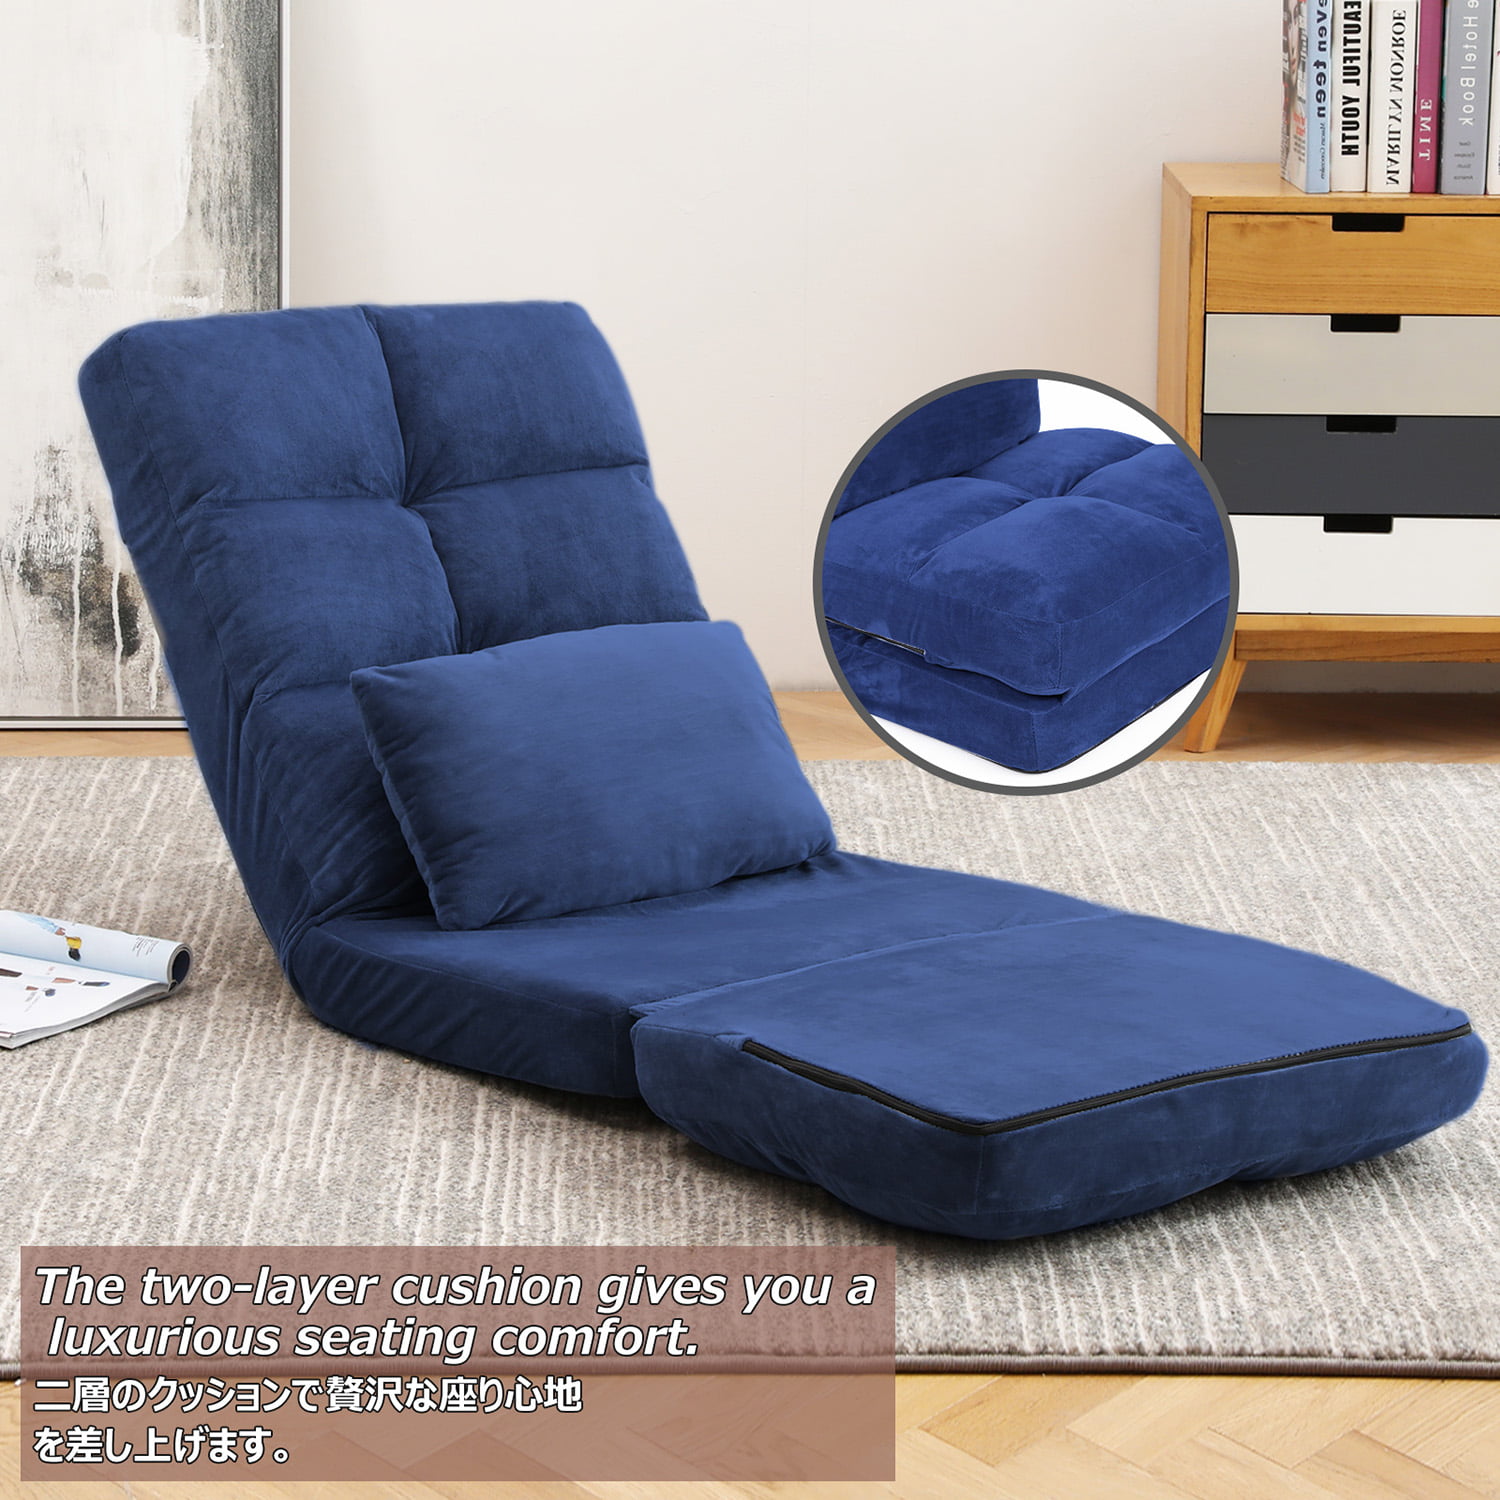 Urnodel Indoor Chaise Lounge Sofa, Floor Chair with Back Support